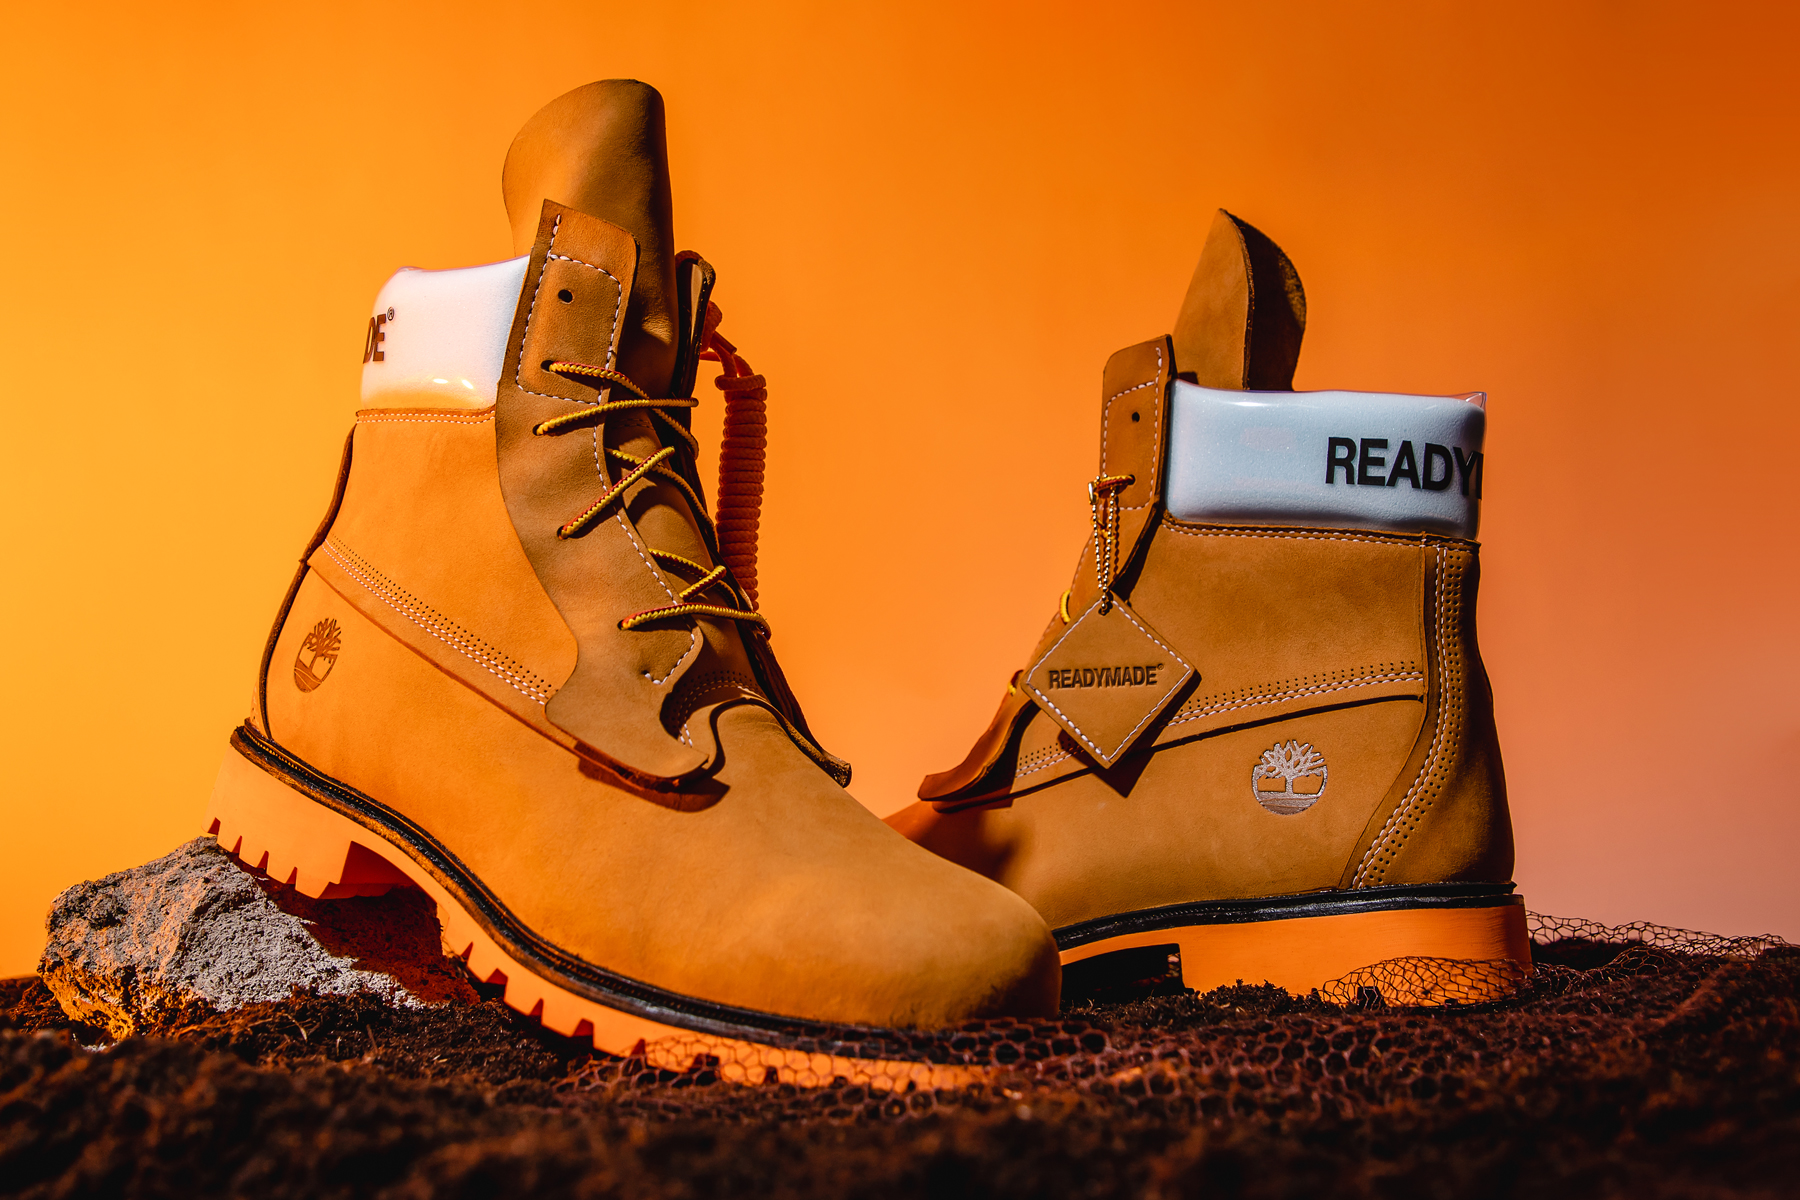 READYMADE x Timberland 6-Inch Boot Closer Look | Hypebeast